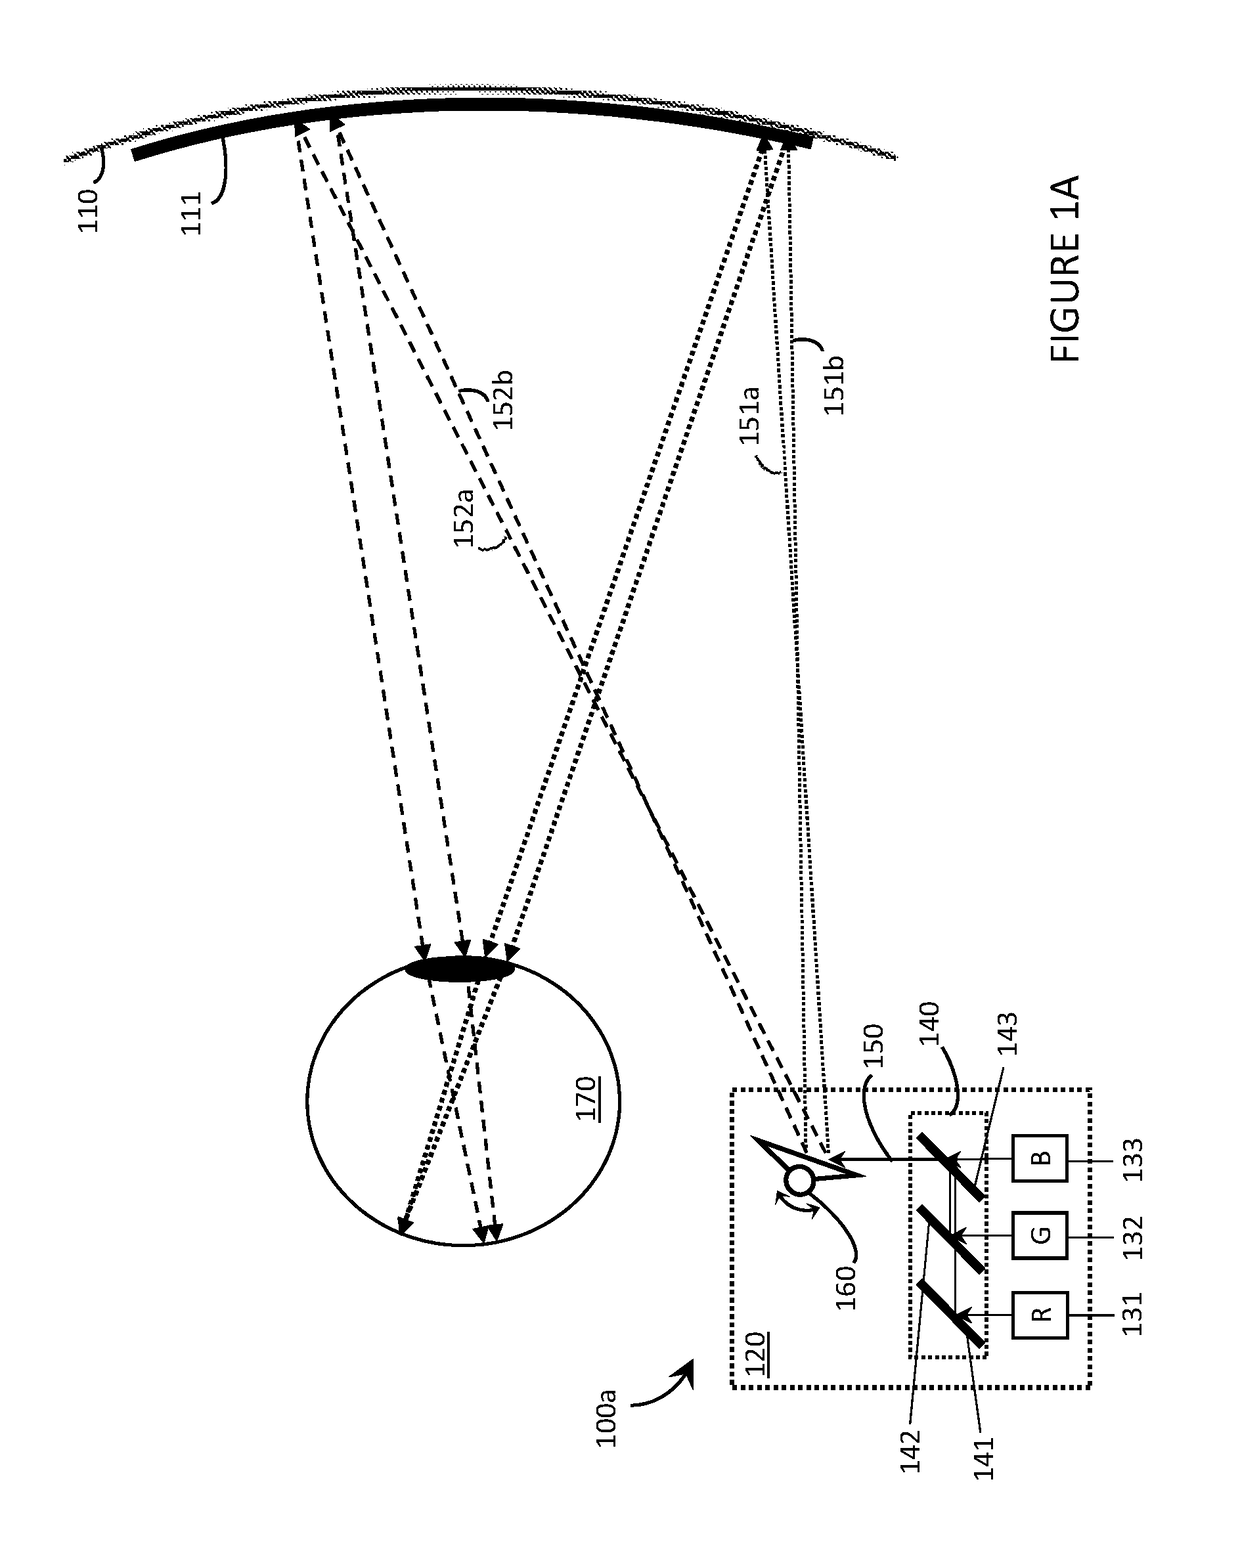 Systems, devices, and methods for field shaping in wearable heads-up display